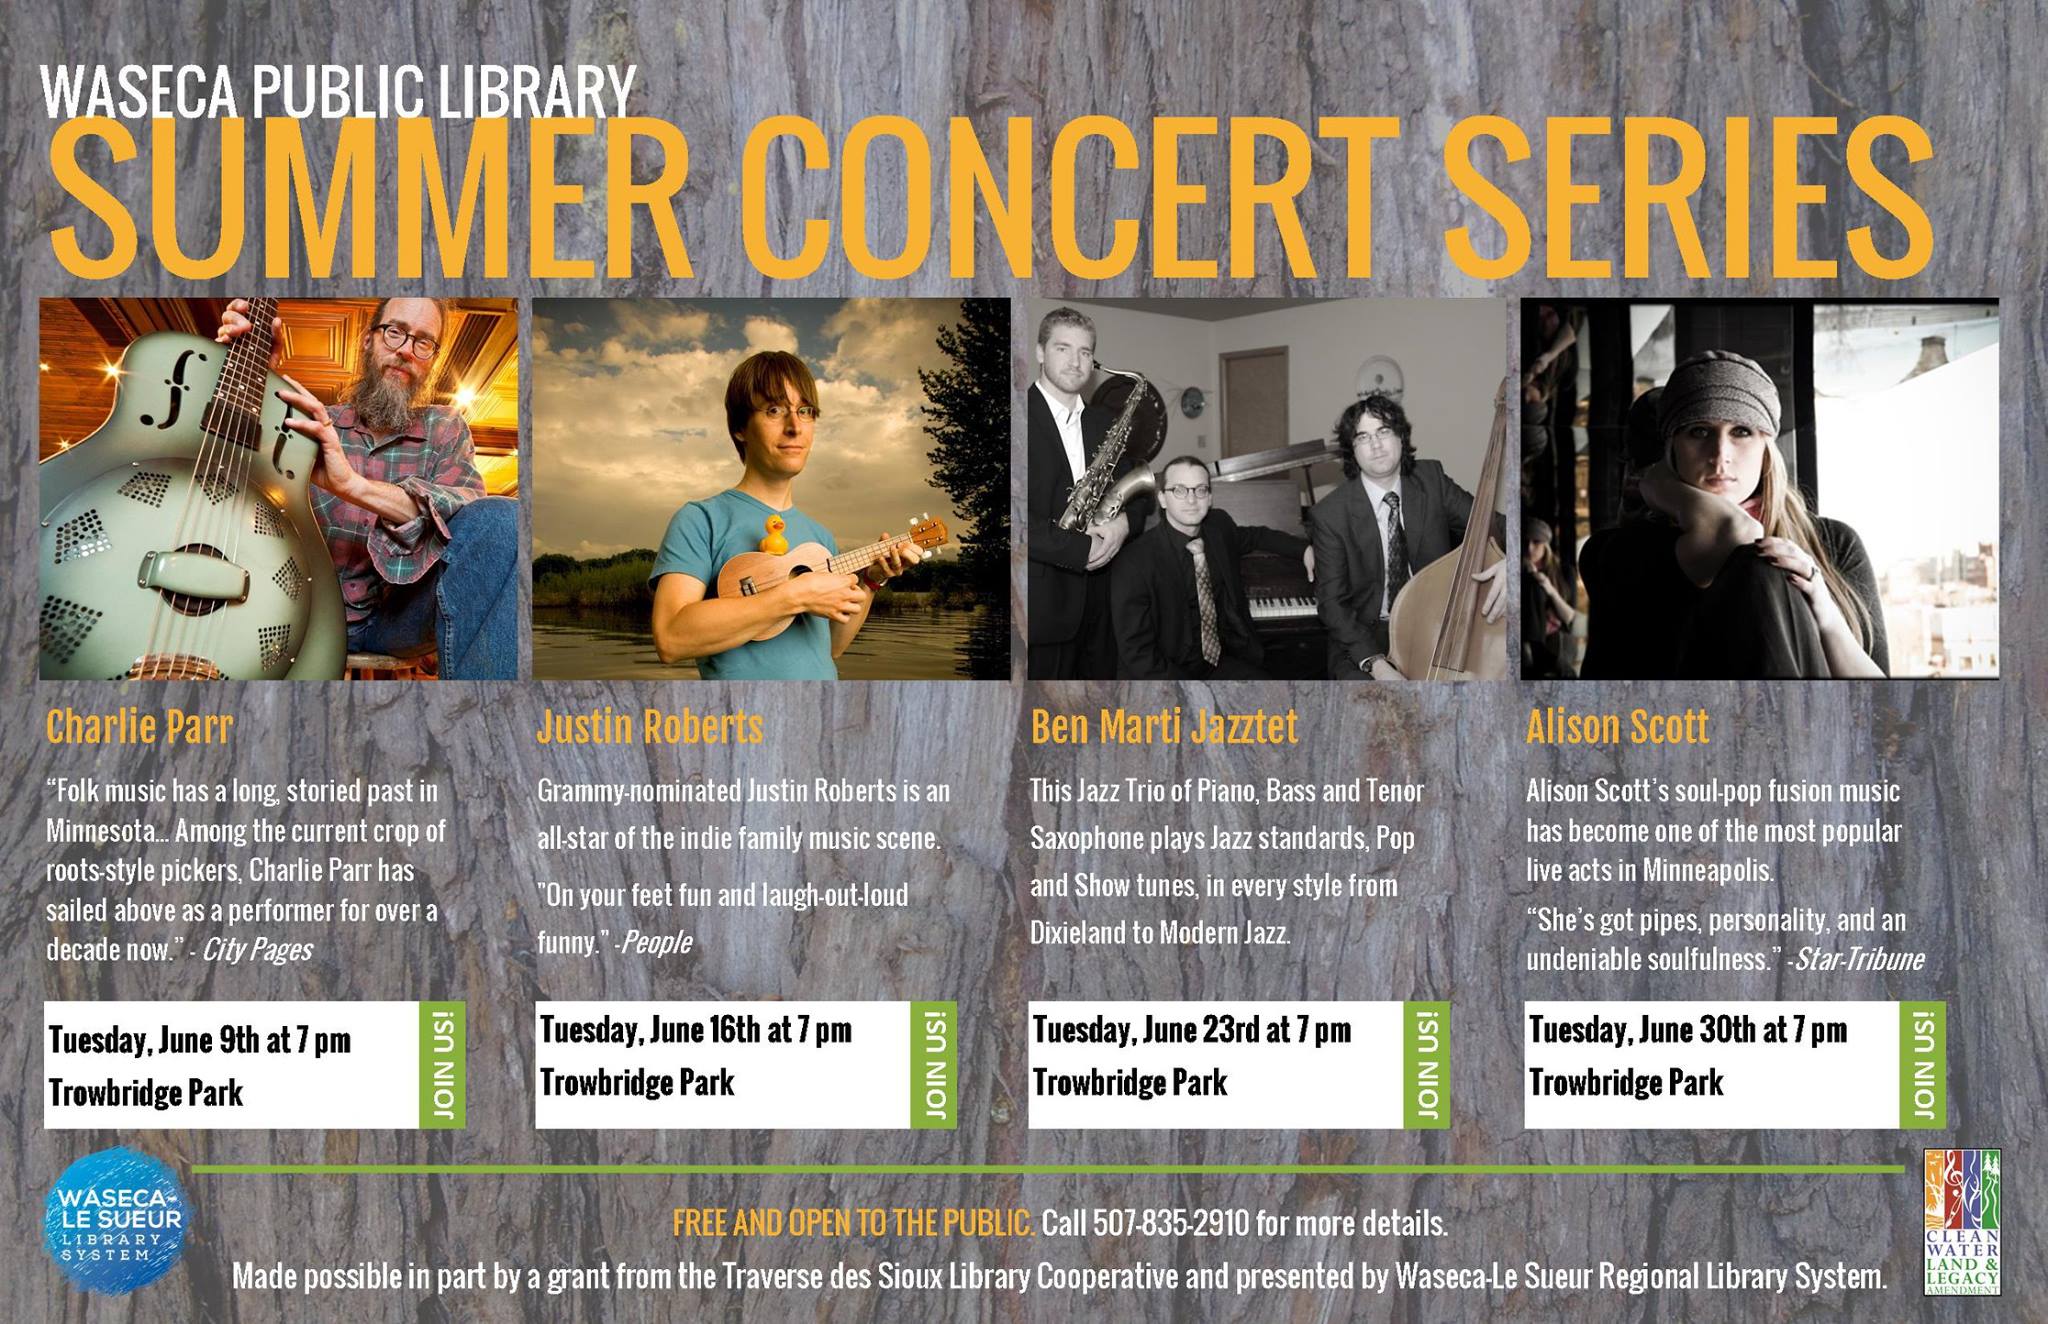 Announcing Waseca Public Library’s Summer Concert Series!